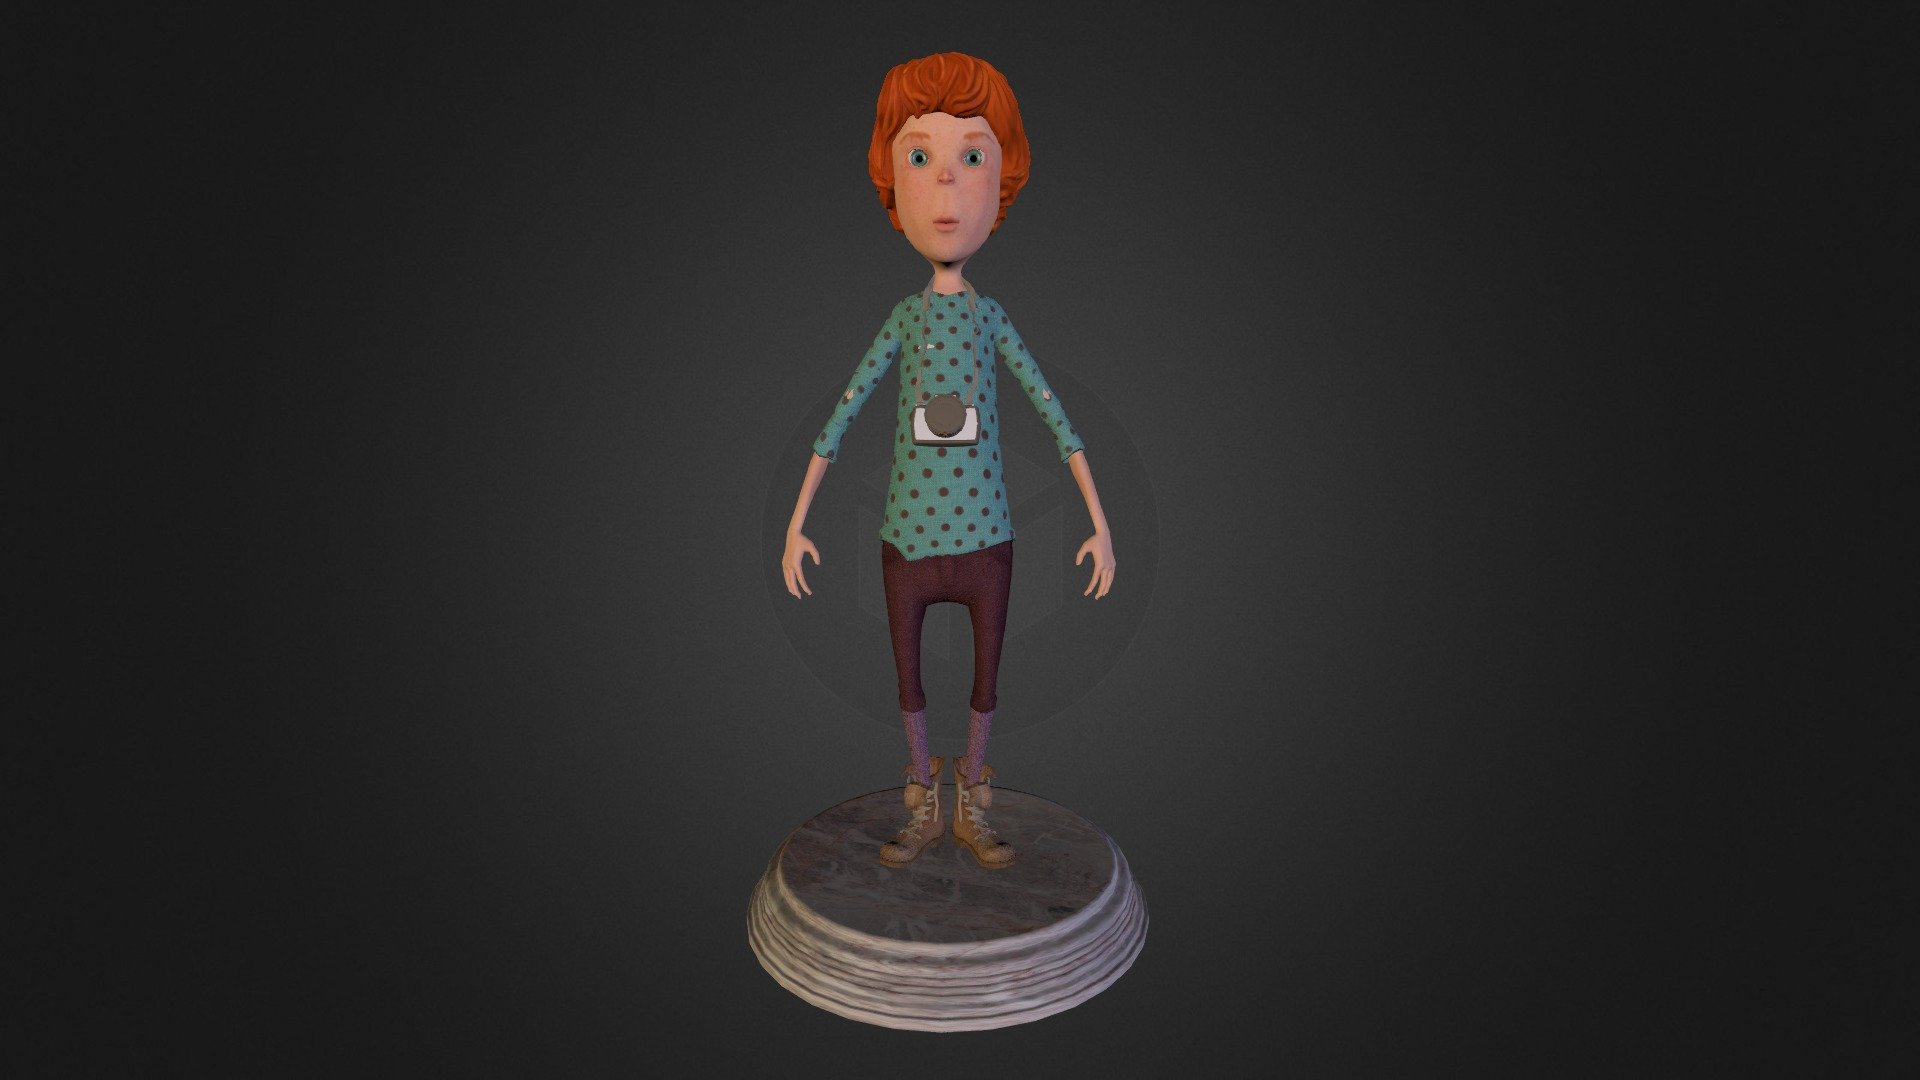 Andy /// 3D character